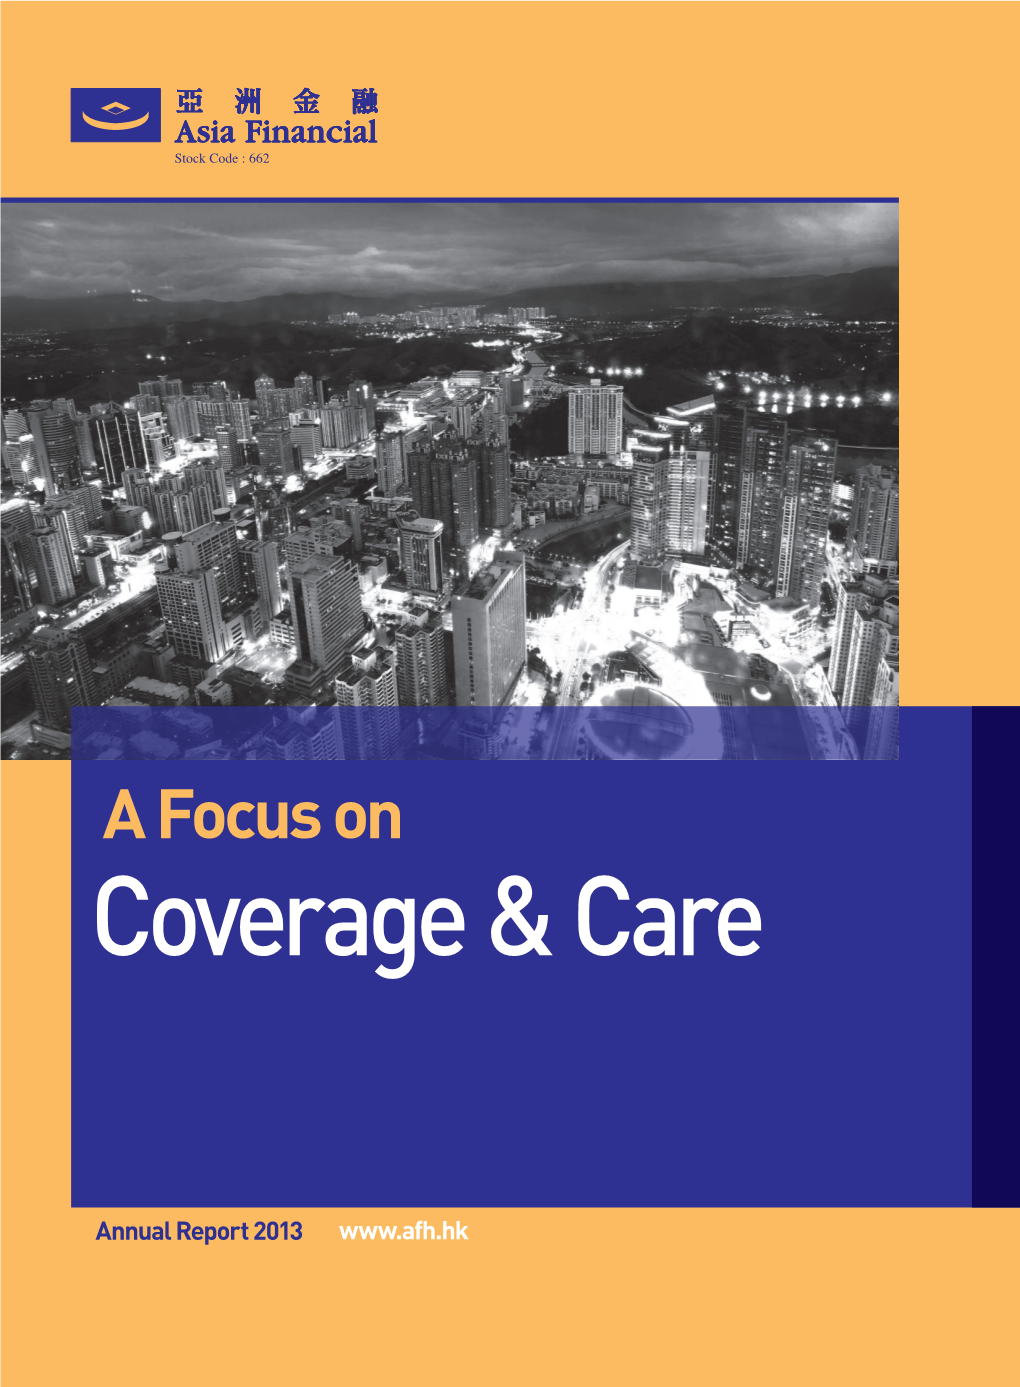 A Focus on Coverage & Care